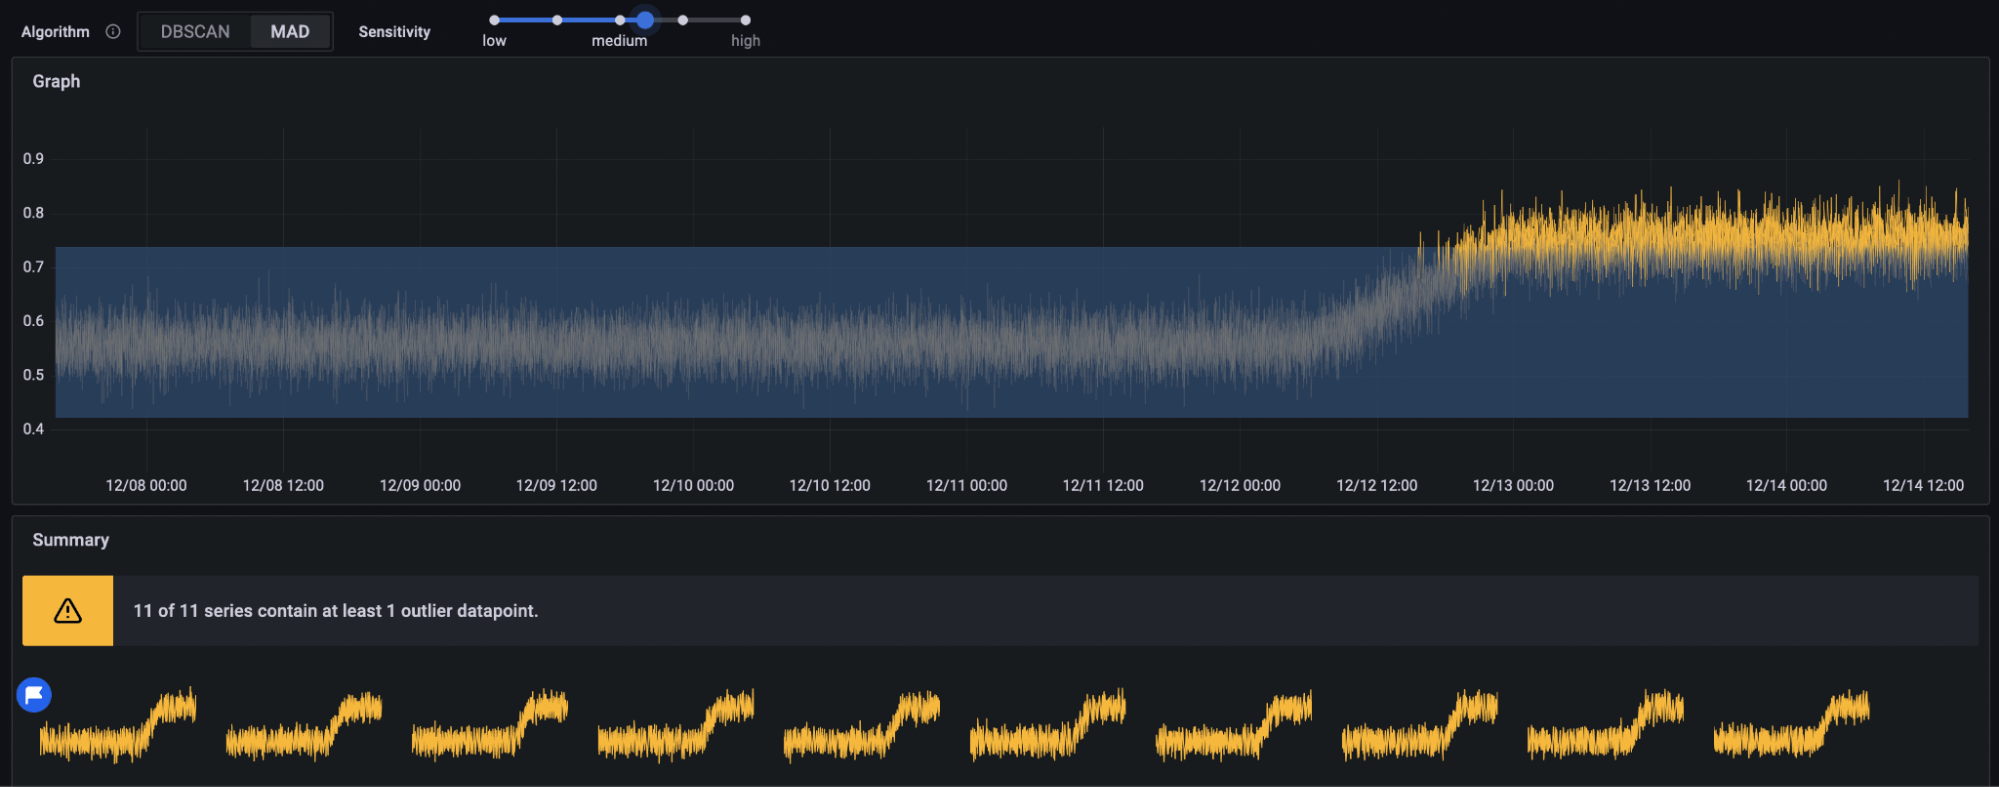 Grafana dashboard showing a successful use case for the MAD algorithm in Grafana Machine Learning.